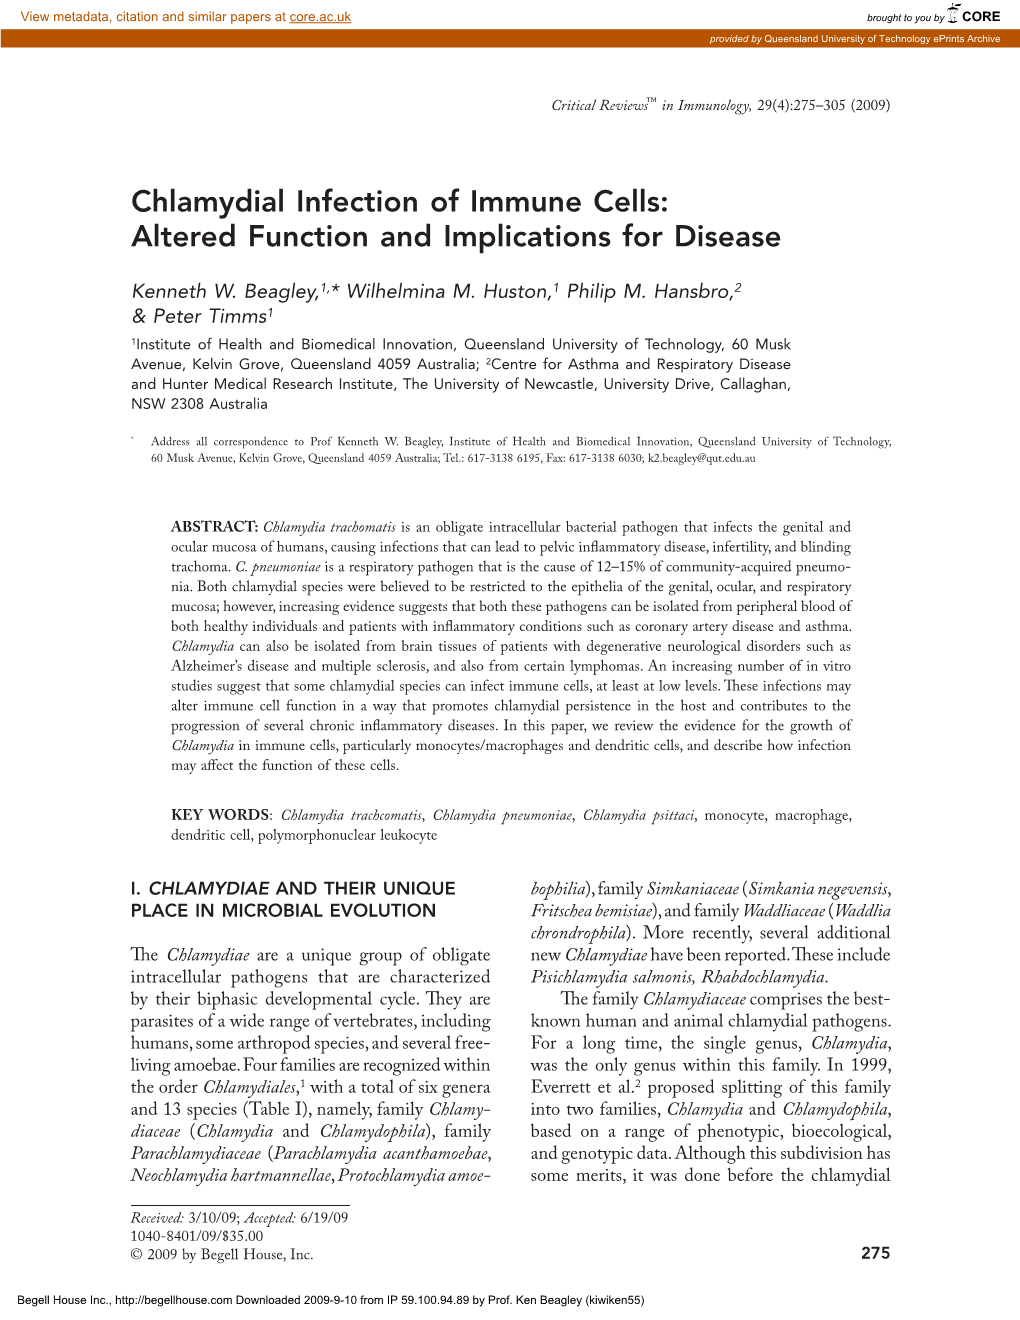 Chlamydial Infection of Immune Cells: Altered Function and Implications for Disease